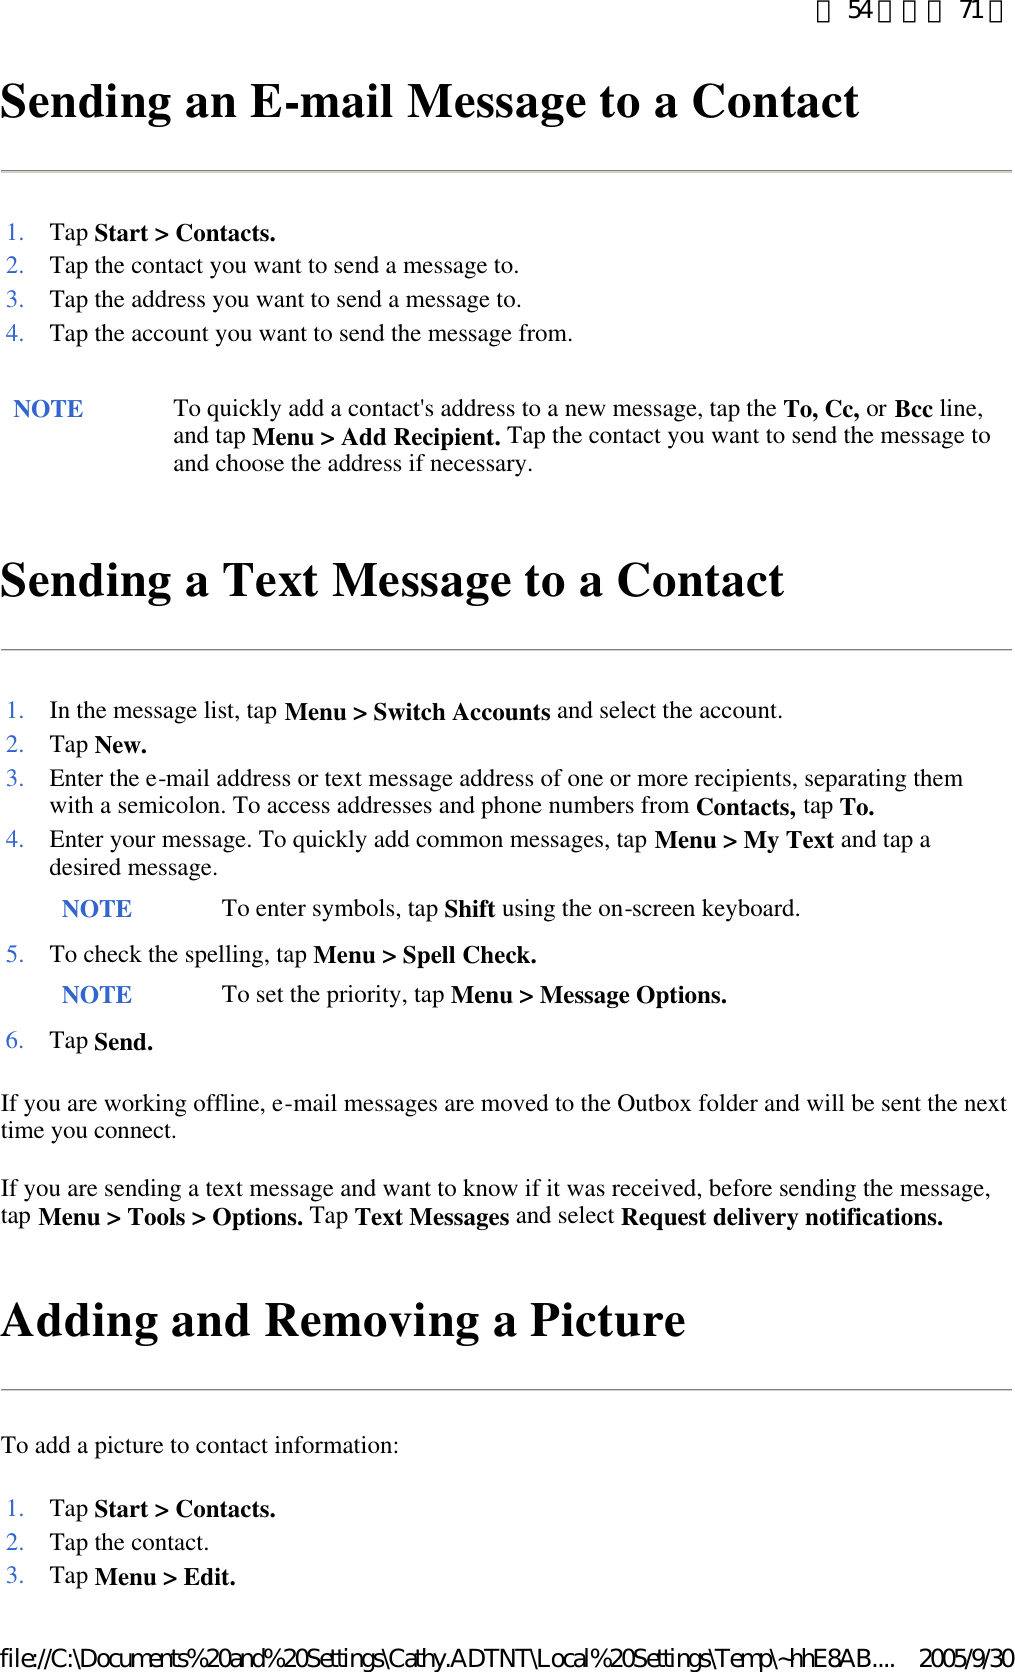 Sending an E-mail Message to a Contact  Sending a Text Message to a Contact  If you are working offline, e-mail messages are moved to the Outbox folder and will be sent the next time you connect. If you are sending a text message and want to know if it was received, before sending the message, tap Menu &gt; Tools &gt; Options. Tap Text Messages and select Request delivery notifications. Adding and Removing a Picture To add a picture to contact information: 1. Tap Start &gt; Contacts.2. Tap the contact you want to send a message to. 3. Tap the address you want to send a message to.4.Tap the account you want to send the message from. NOTE To quickly add a contact&apos;s address to a new message, tap the To, Cc, or Bcc line, and tap Menu &gt; Add Recipient. Tap the contact you want to send the message to and choose the address if necessary.  1. In the message list, tap Menu &gt; Switch Accounts and select the account. 2. Tap New.3. Enter the e-mail address or text message address of one or more recipients, separating them with a semicolon. To access addresses and phone numbers from Contacts, tap To.4. Enter your message. To quickly add common messages, tap Menu &gt; My Text and tap a desired message. NOTE To enter symbols, tap Shift using the on-screen keyboard. 5. To check the spelling, tap Menu &gt; Spell Check. NOTE To set the priority, tap Menu &gt; Message Options. 6. Tap Send.1. Tap Start &gt; Contacts.2. Tap the contact.3. Tap Menu &gt; Edit.第 54 頁，共 71 頁2005/9/30file://C:\Documents%20and%20Settings\Cathy.ADTNT\Local%20Settings\Temp\~hhE8AB....